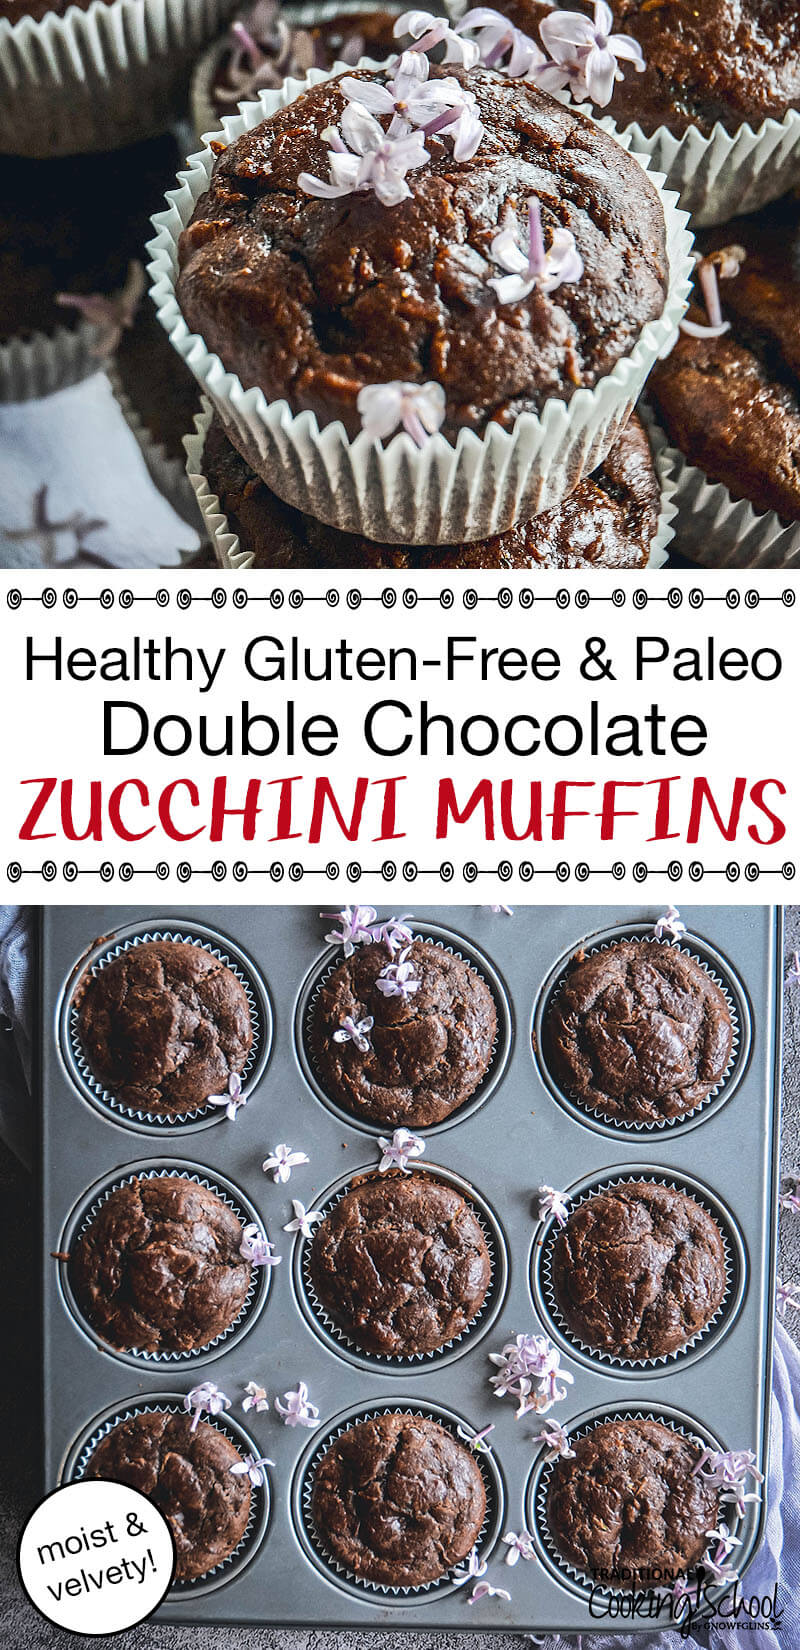 photo collage of chocolate muffins, still in their muffin tin or in an asymmetrical stack, sprinkled with lavender flowers, with text overlay: "Healthy Gluten-Free & Paleo Double Chocolate Zucchini Muffins (moist & velvety!)"